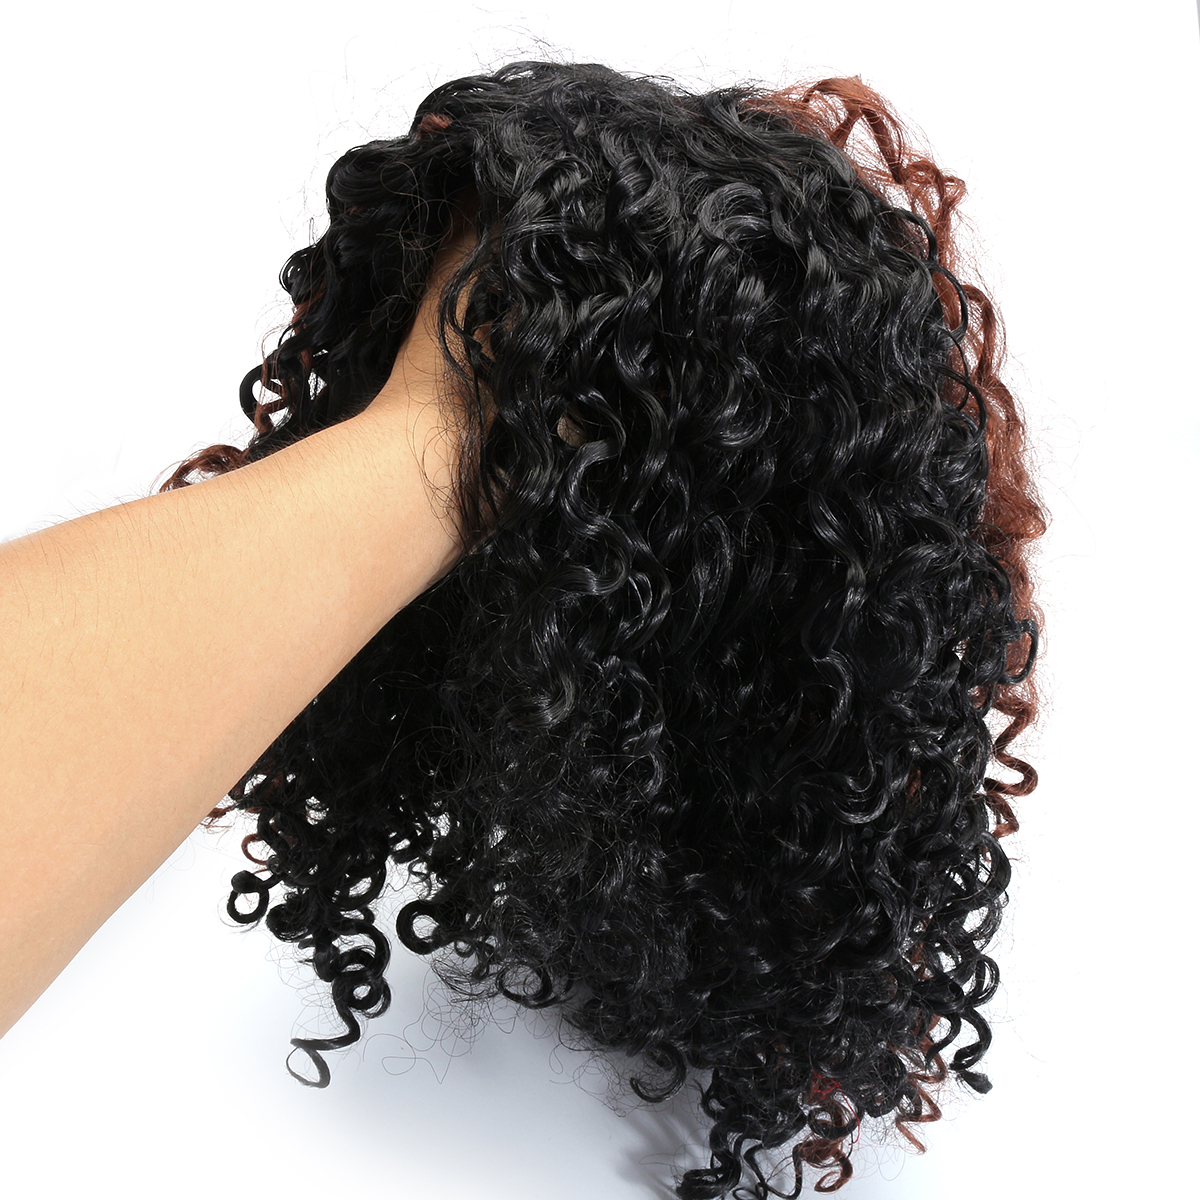 Brazilian-Black-Brown-Hair-Deep-Wavy-Curly-Lace-Front-Full-Wig-1230999-6